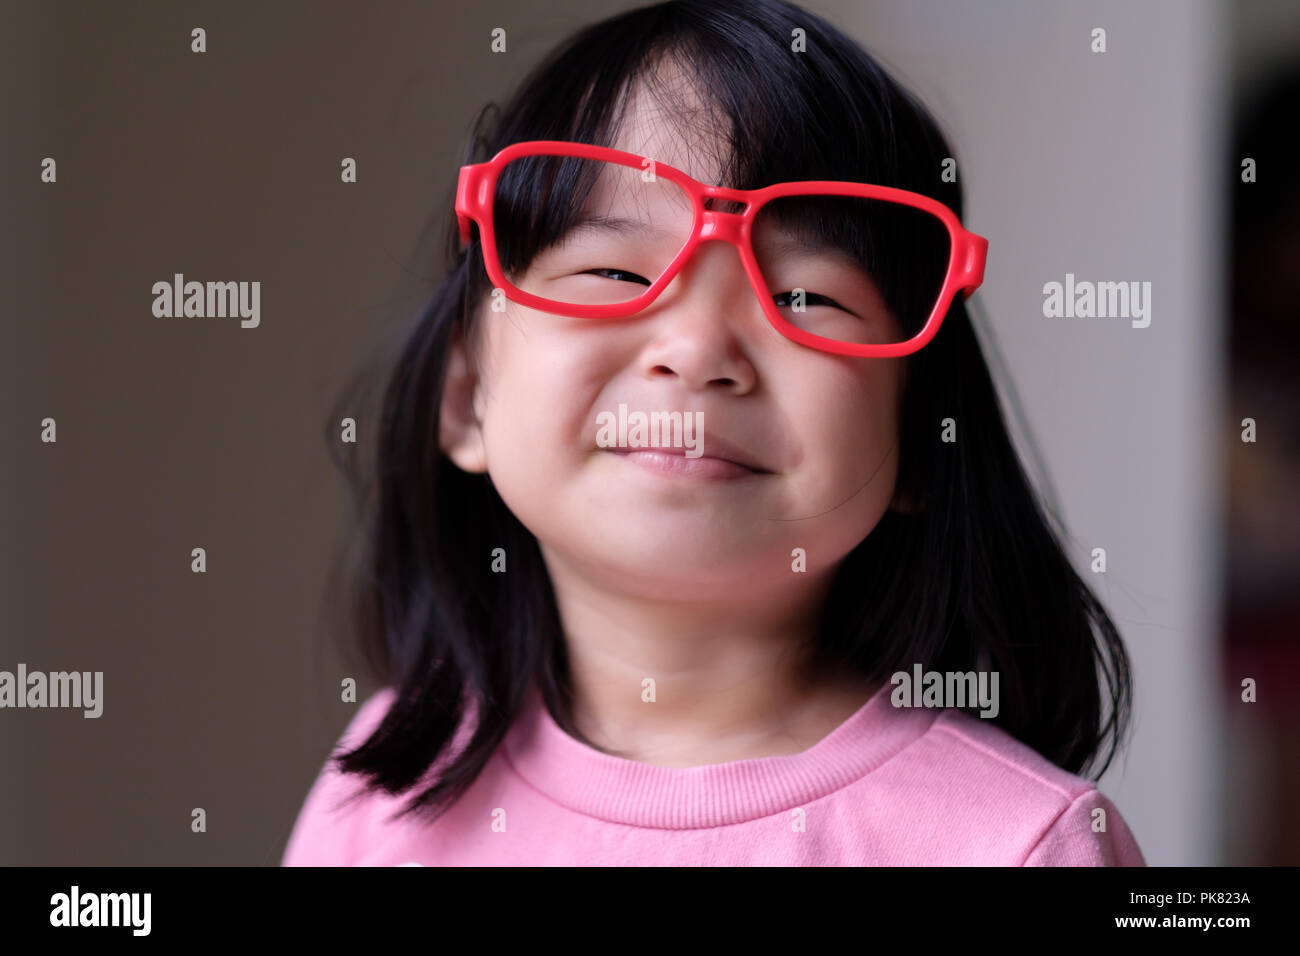 Funny little child with big red glasses Stock Photo